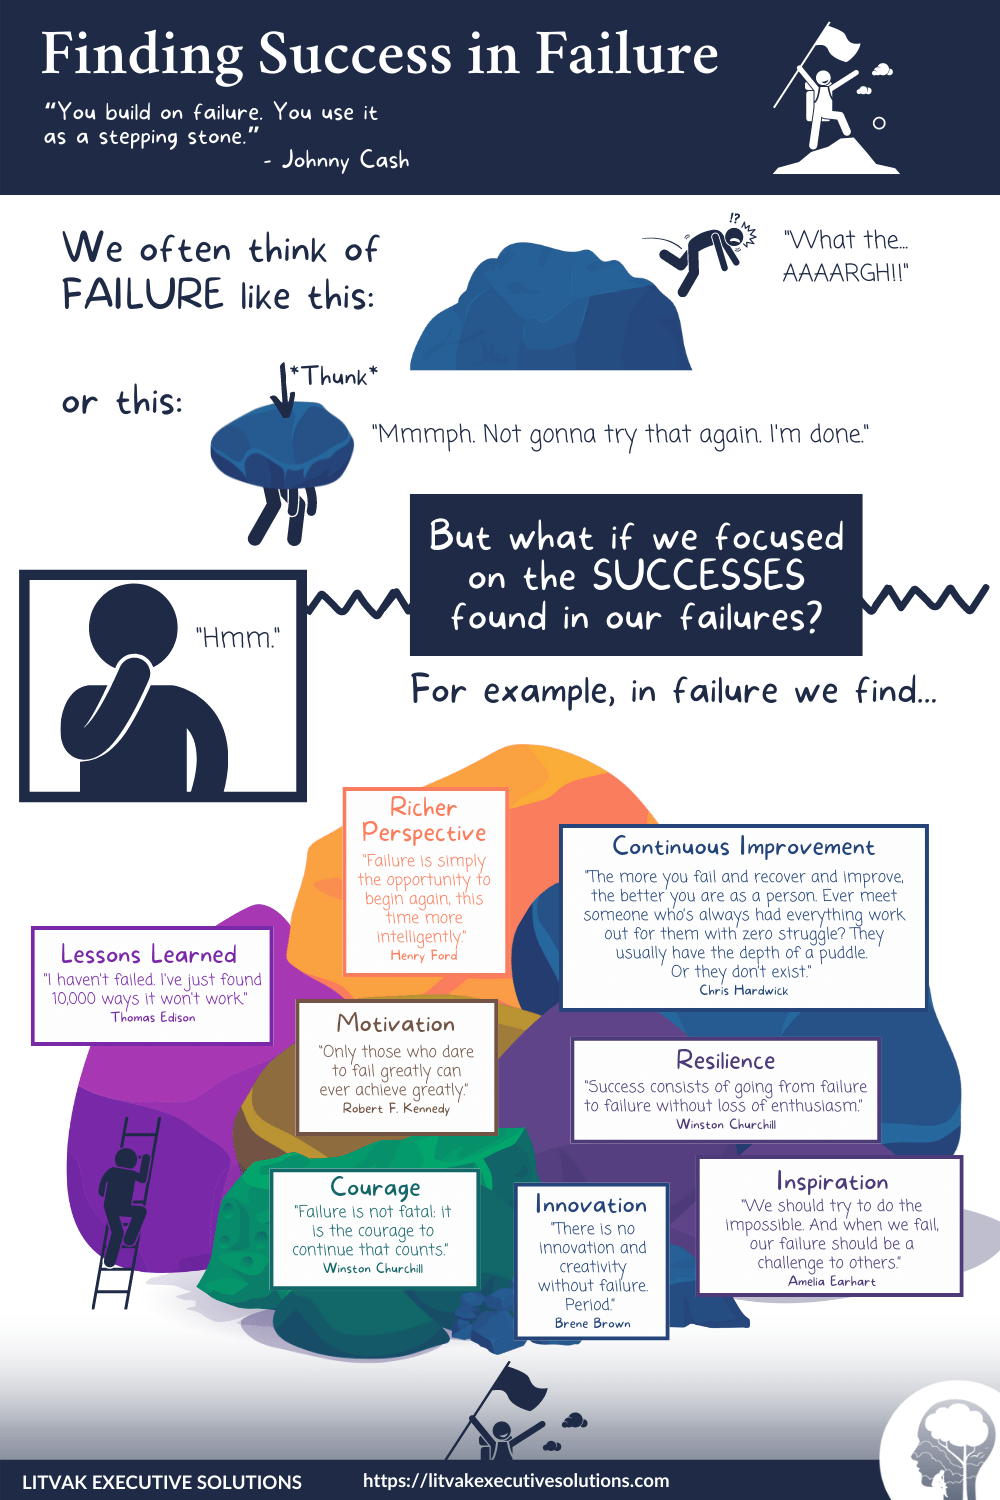 Finding Success in Failure infographic